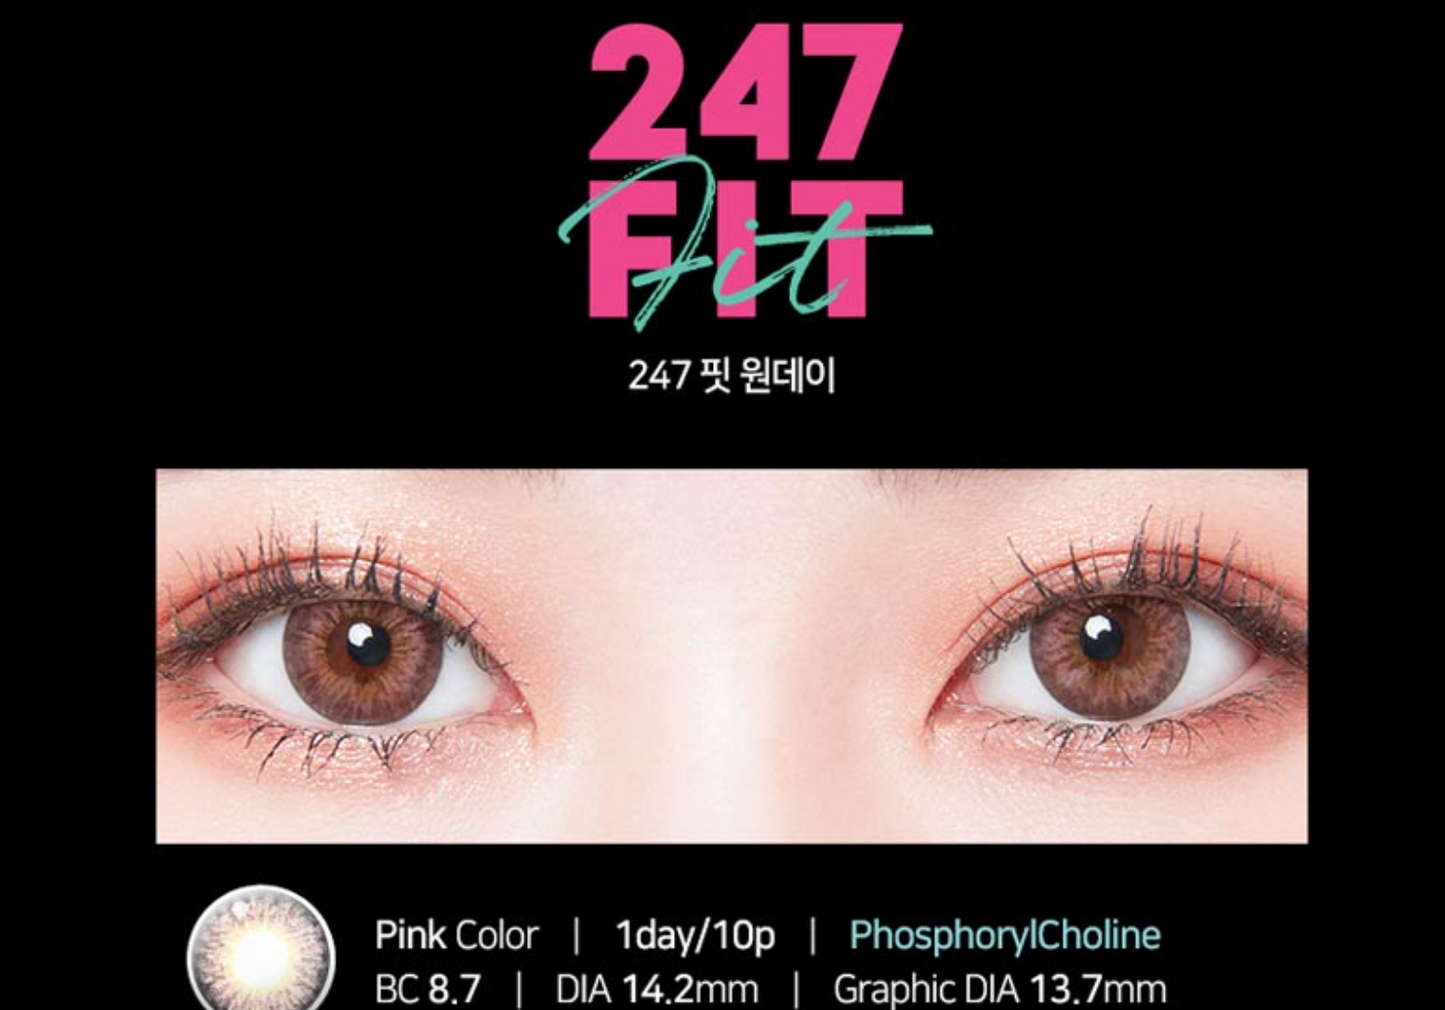 [Order Price] LENSTOWN 247 FIT - PINK Daily Disposable/10 Tablets 